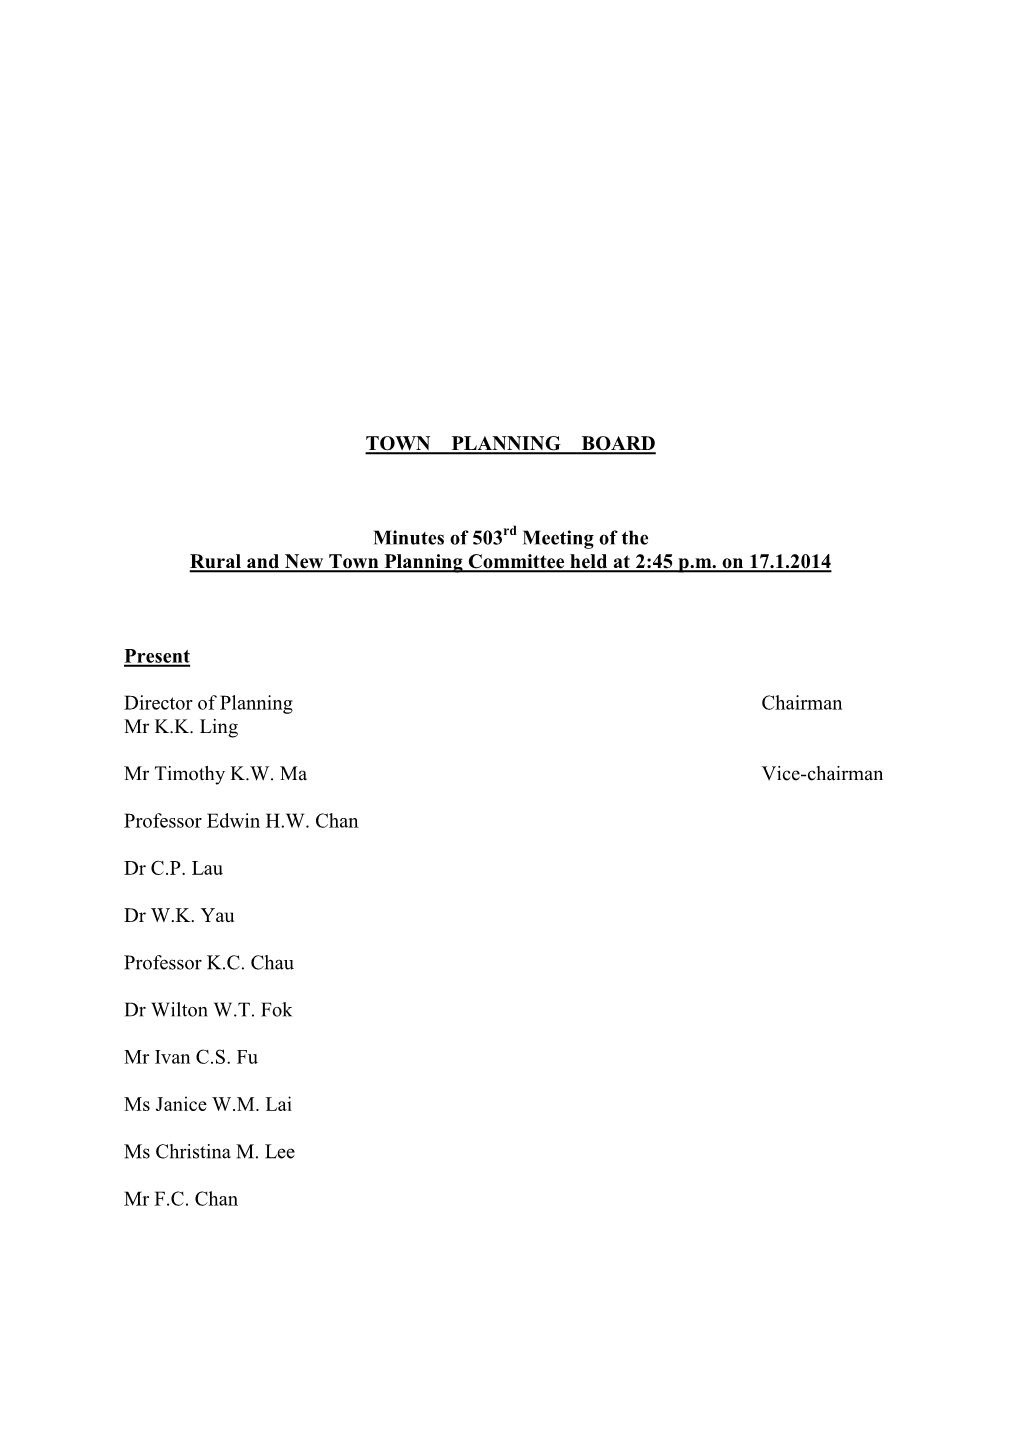 TOWN PLANNING BOARD Minutes of 503 Meeting of the Rural and New